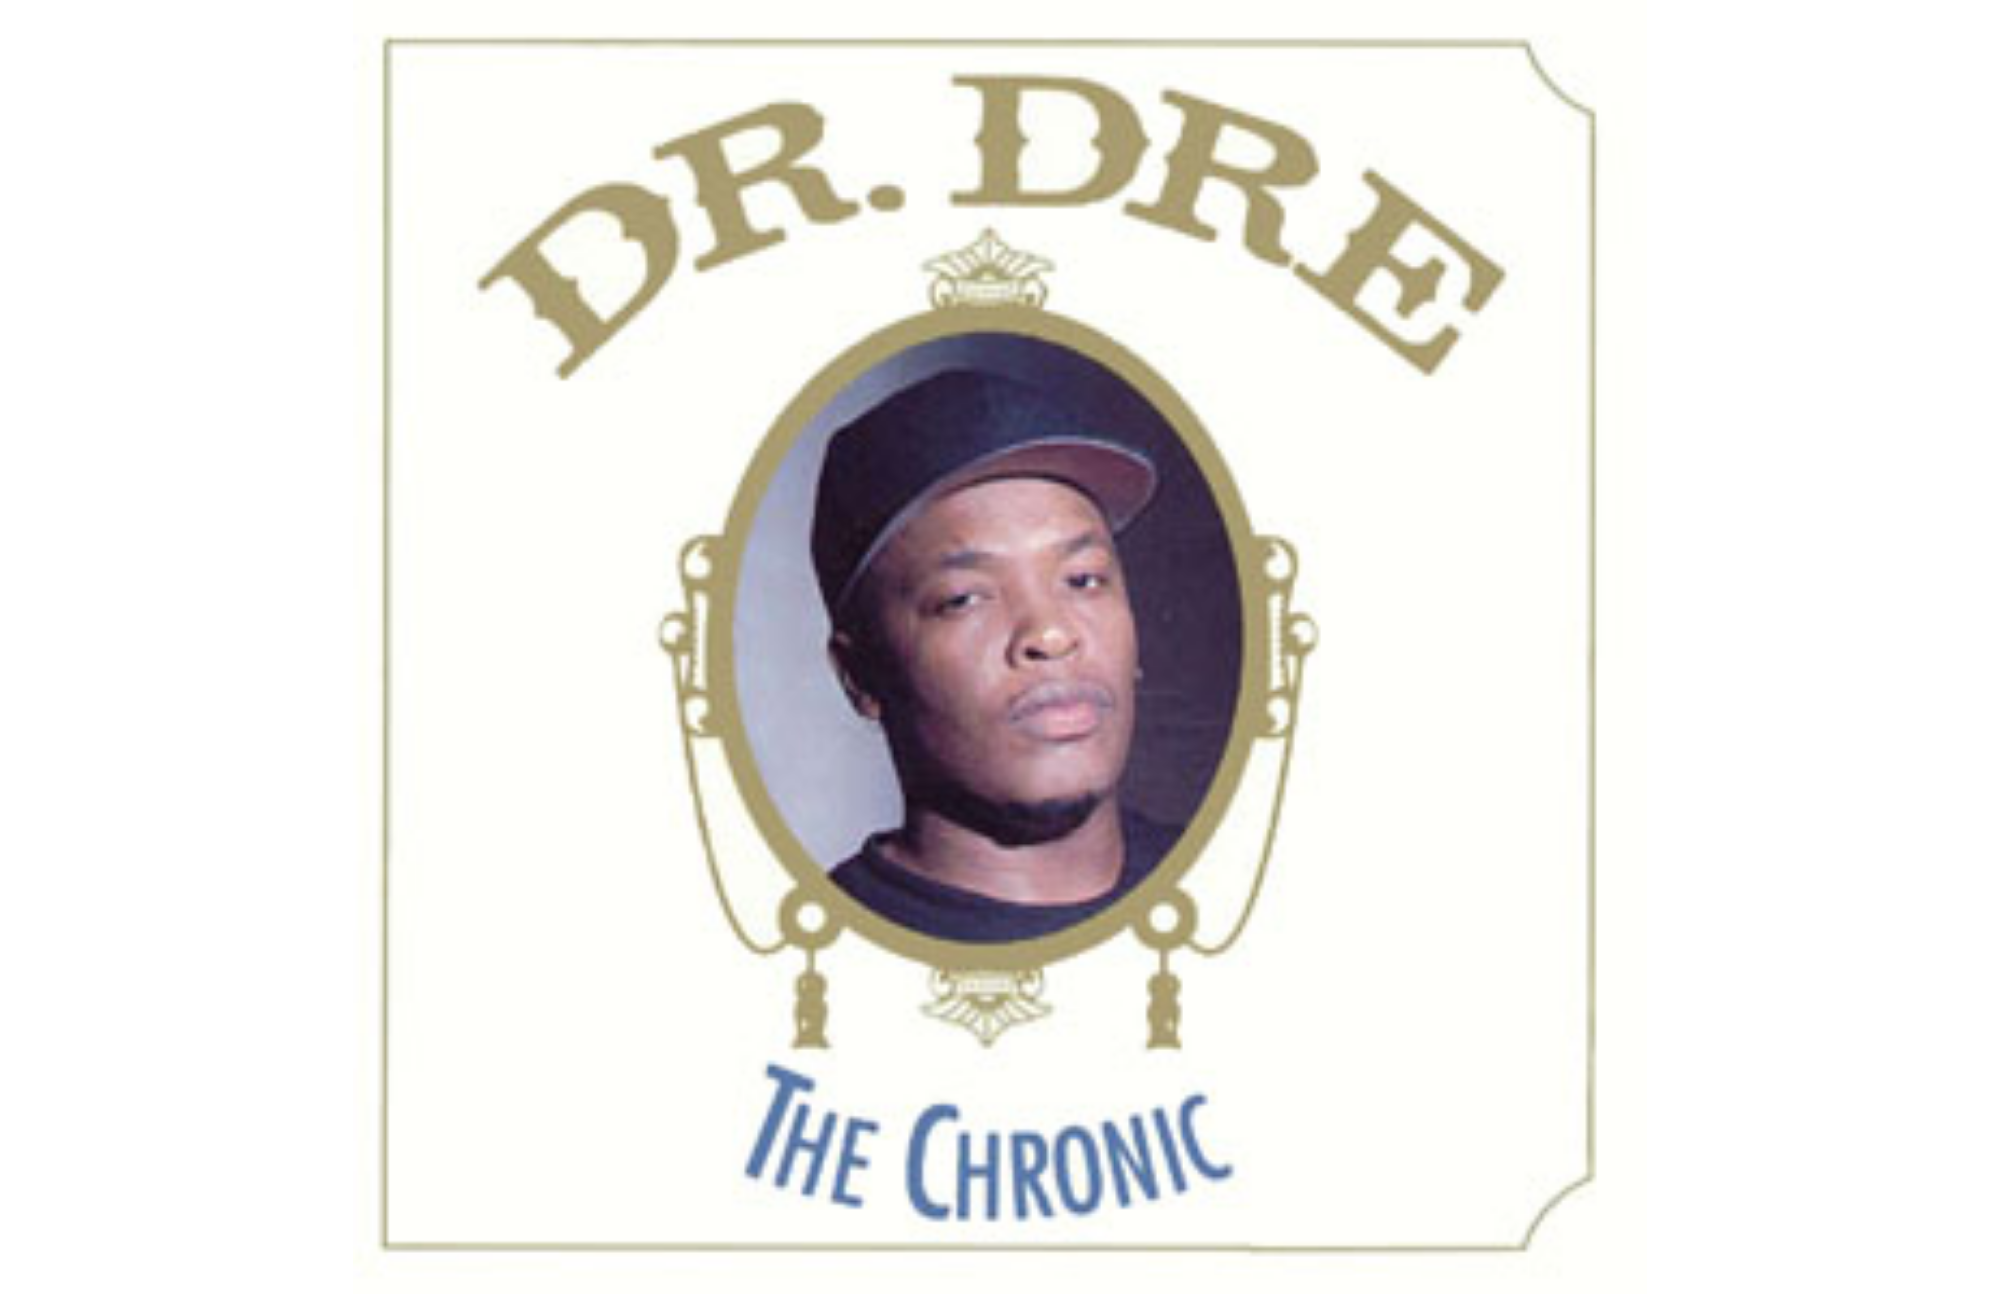 The album cover of "The Chronic" with Dr. Dre's face